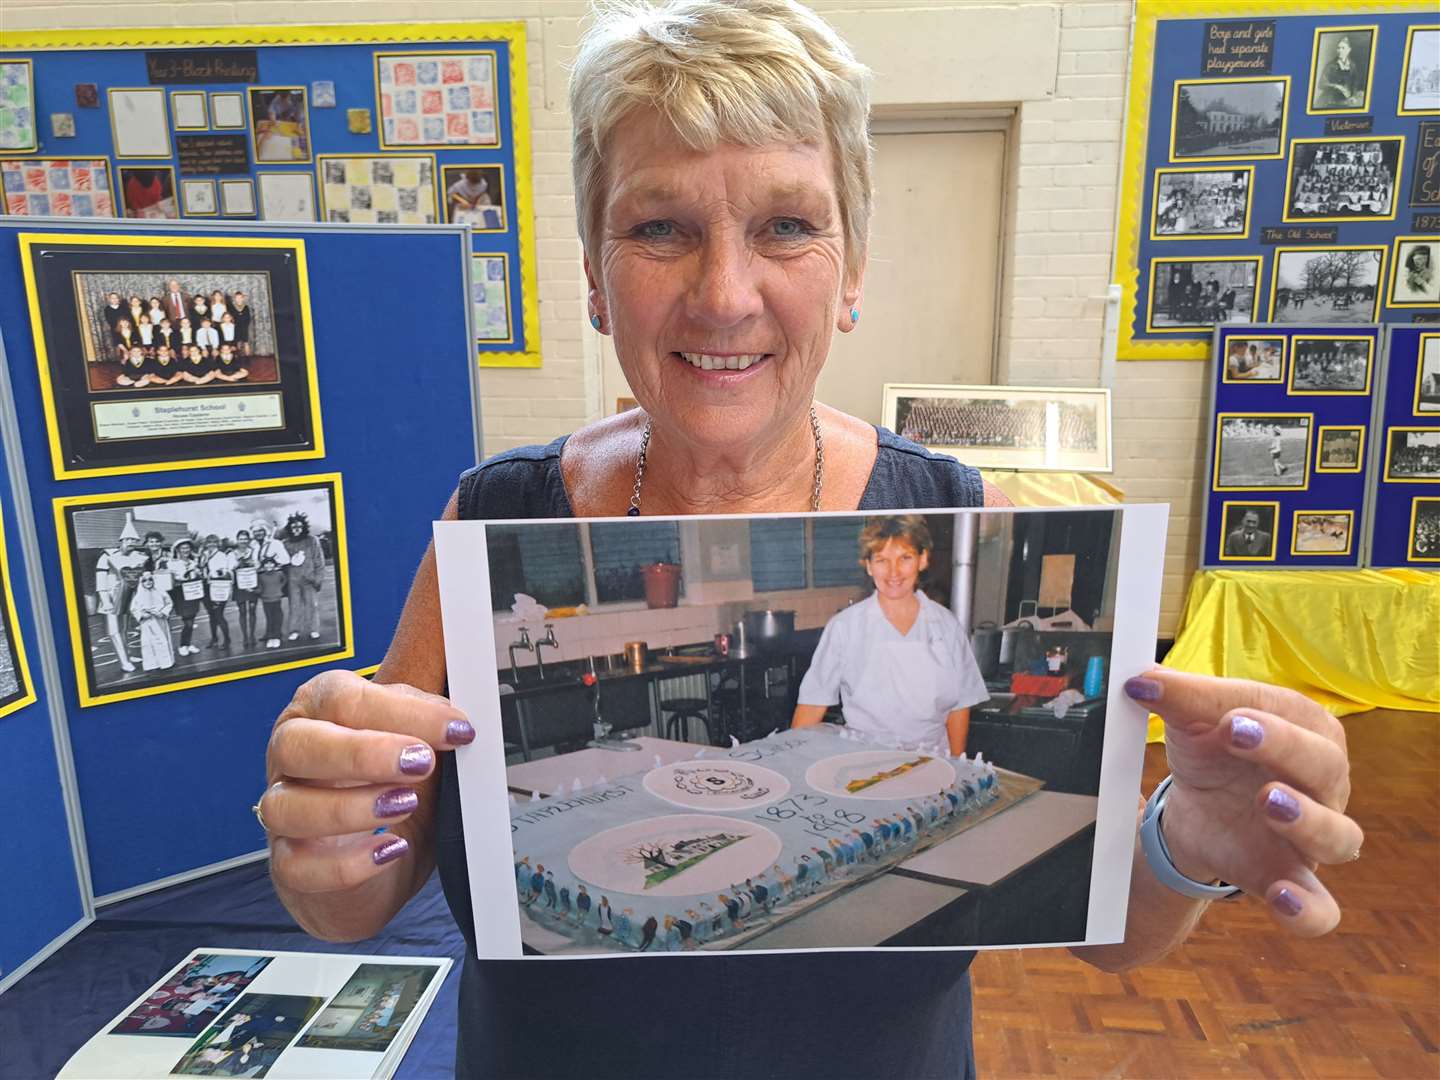 Serena Hoadley of Staplehurst School with a photo of herself from 25 years ago